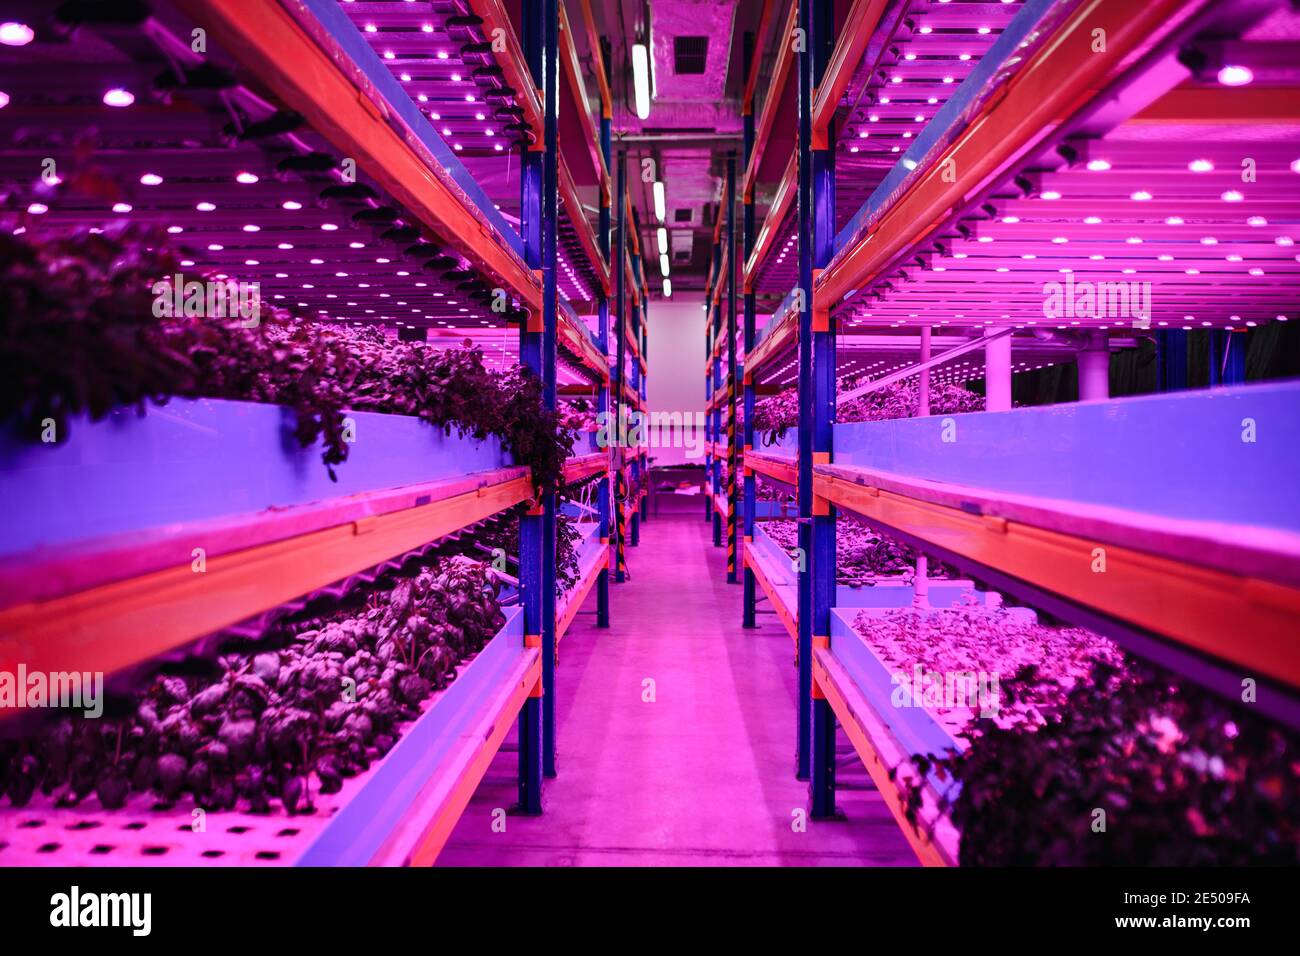 Aquaponic farm, sustainable business and artificial lighting. Stock Photo